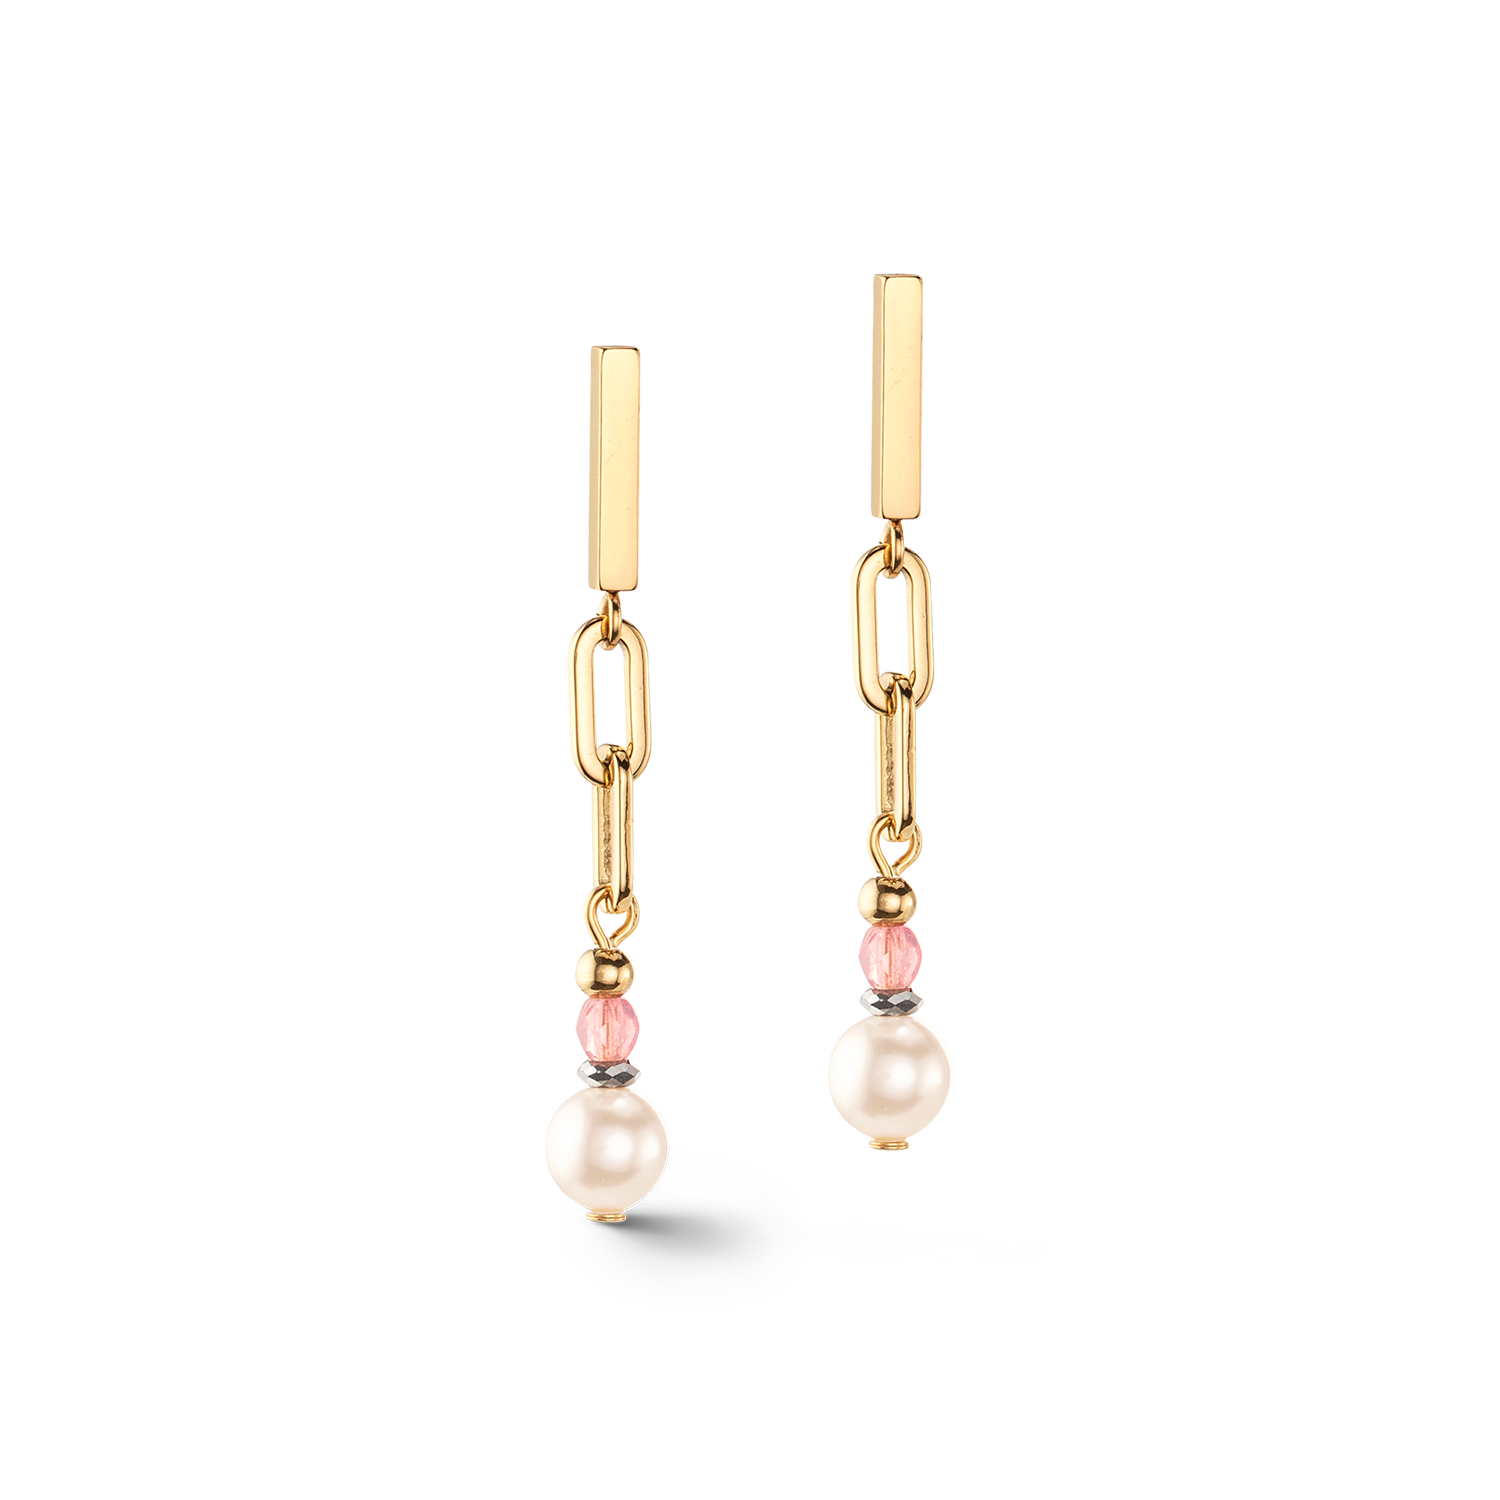 Classic Layer earrings gold multicolour